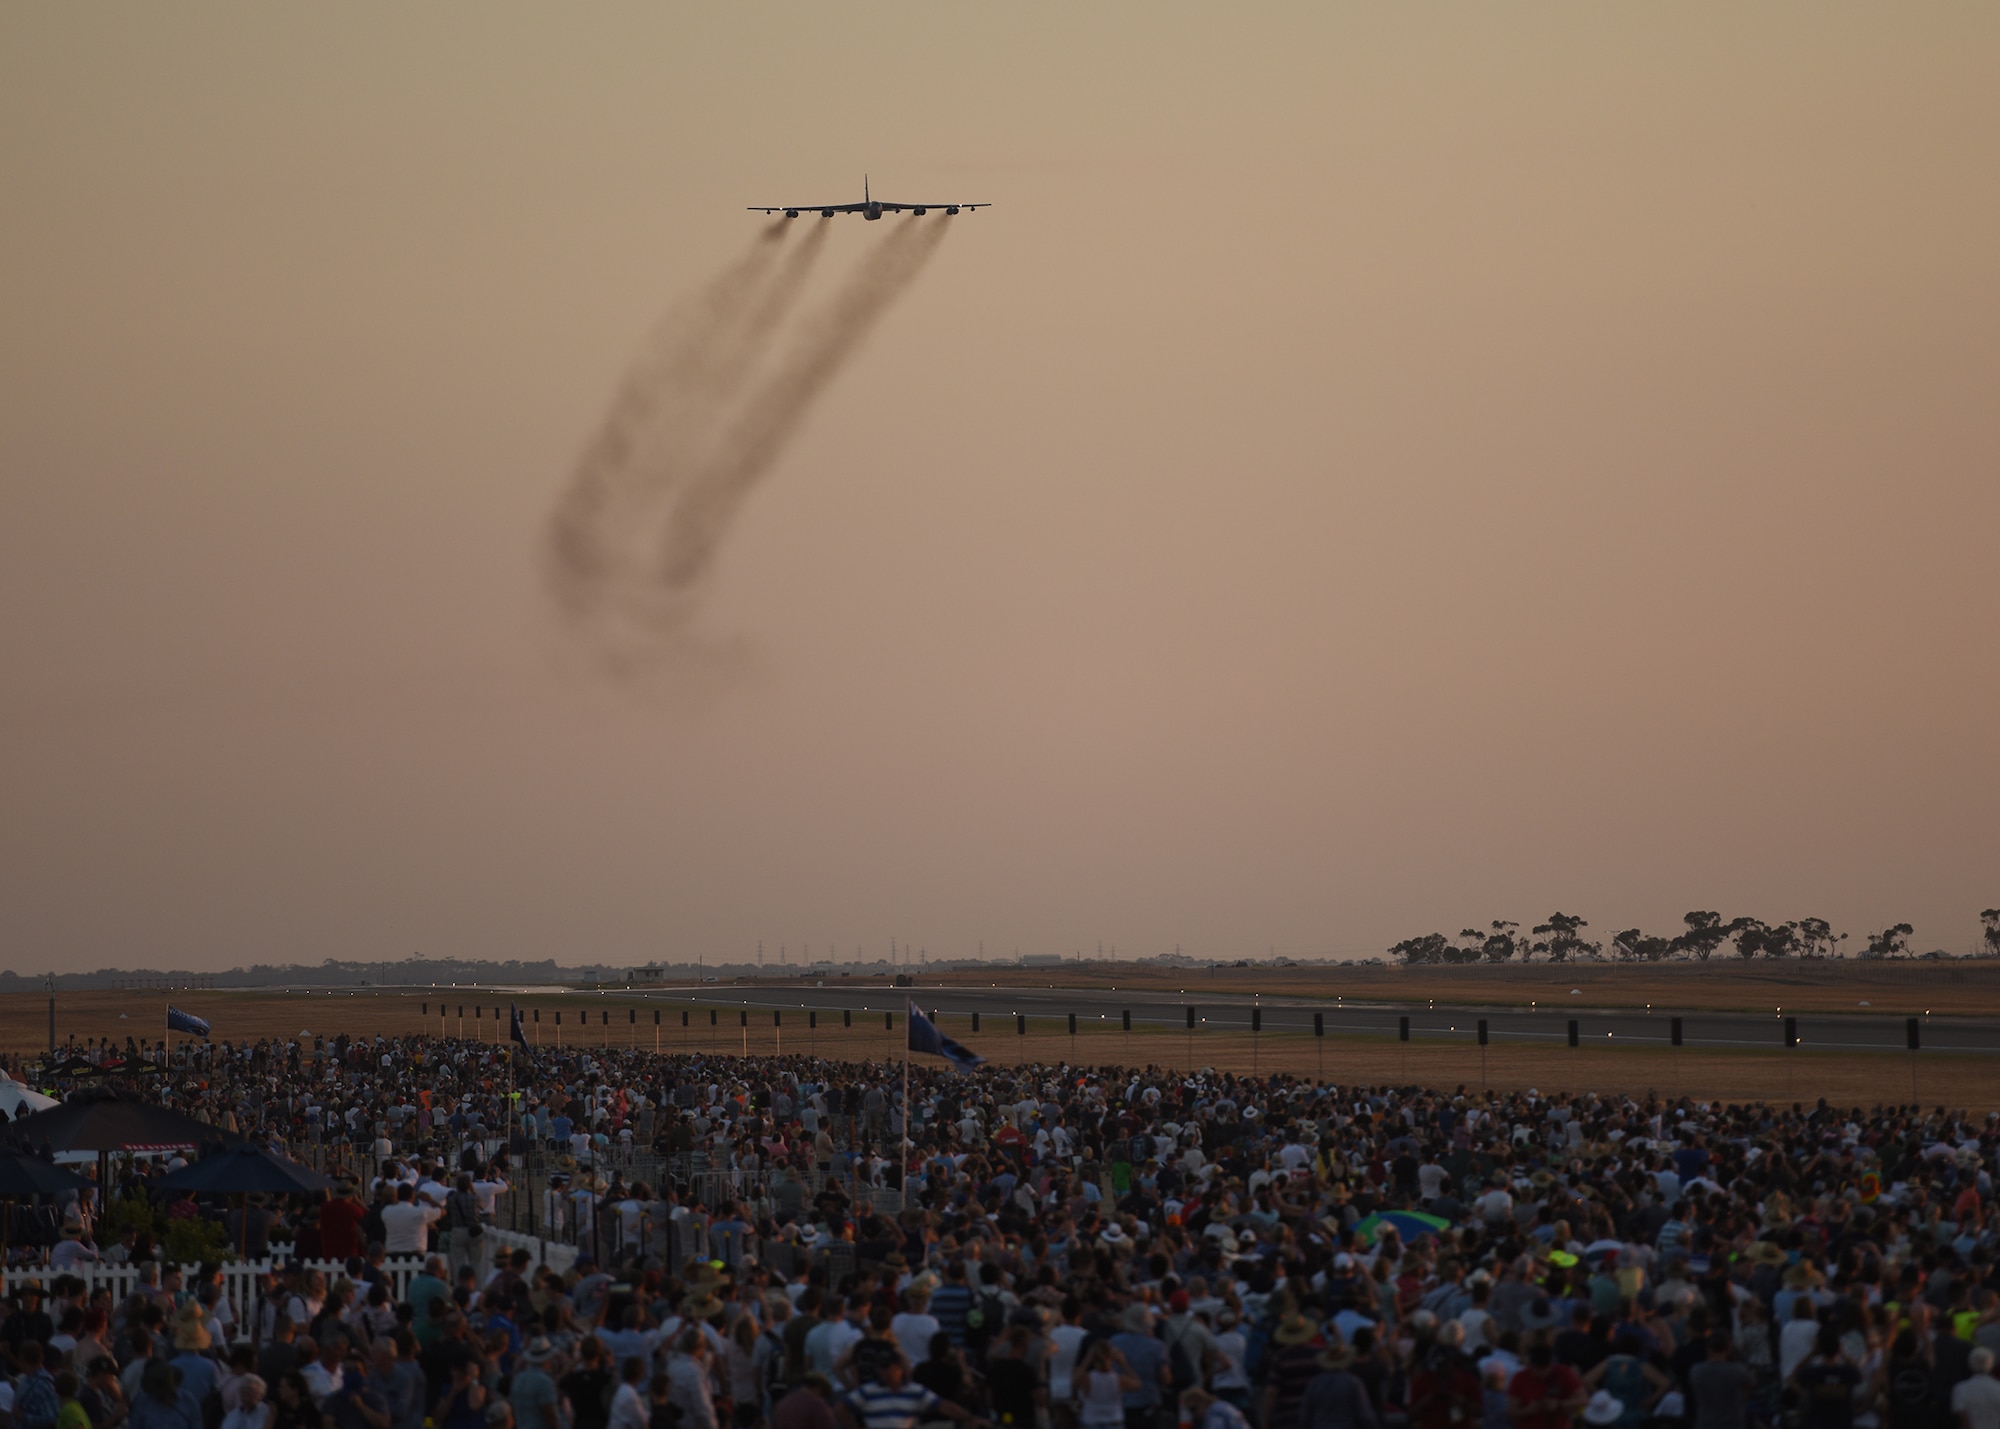 A U.S. Air Force B-52 Stratofortress assigned to the 23rd Expeditionary Bomb Squadron, Andersen Air Force Base, Guam, flies by a crowd at the 2019 Australian International Airshow and Aerospace & Defence Exposition (AVALON 2019) in Geelong, Victoria, Australia, March 1, 2019.